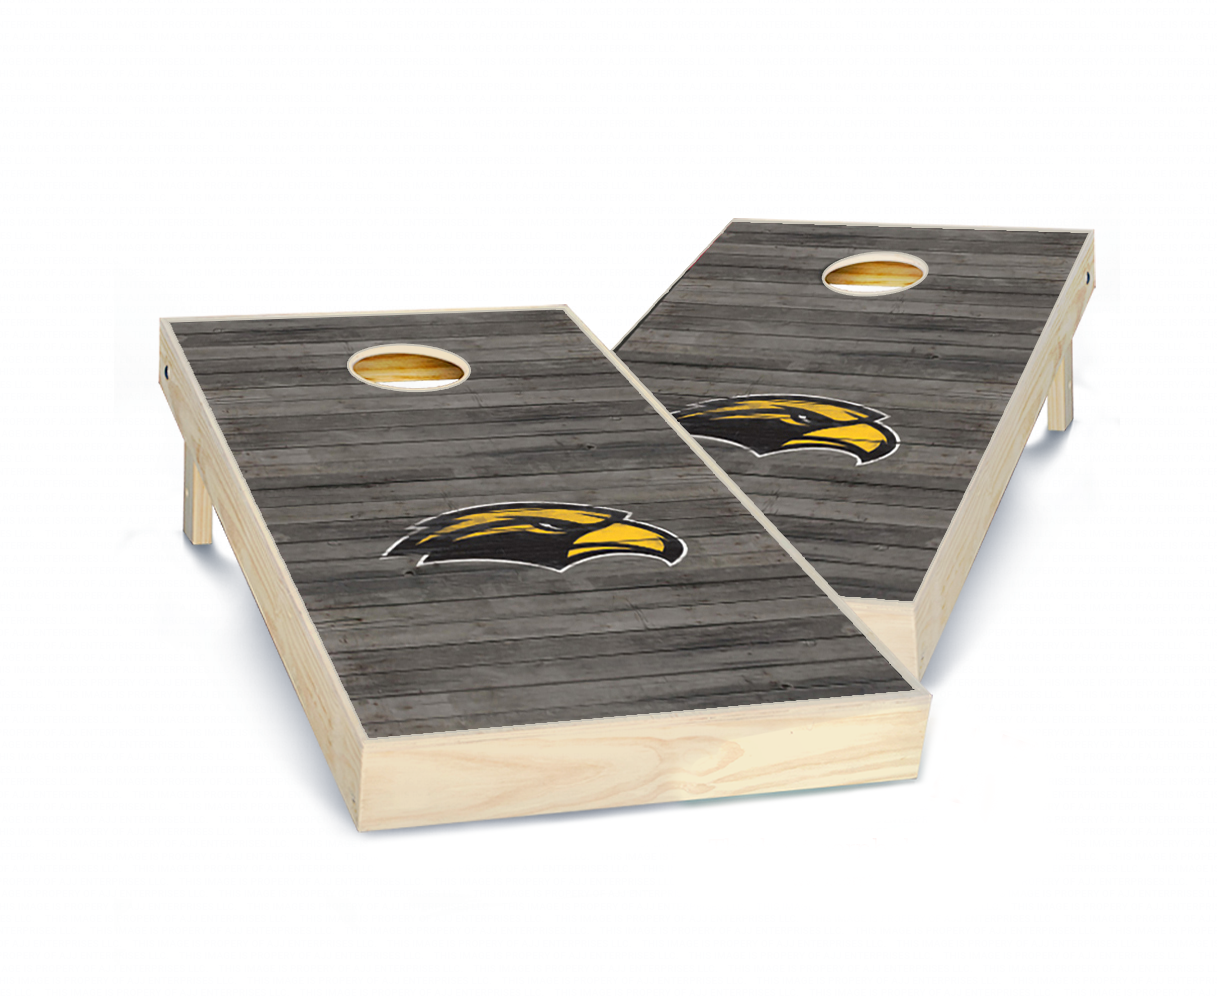 "Southern Miss Distressed" Cornhole Boards